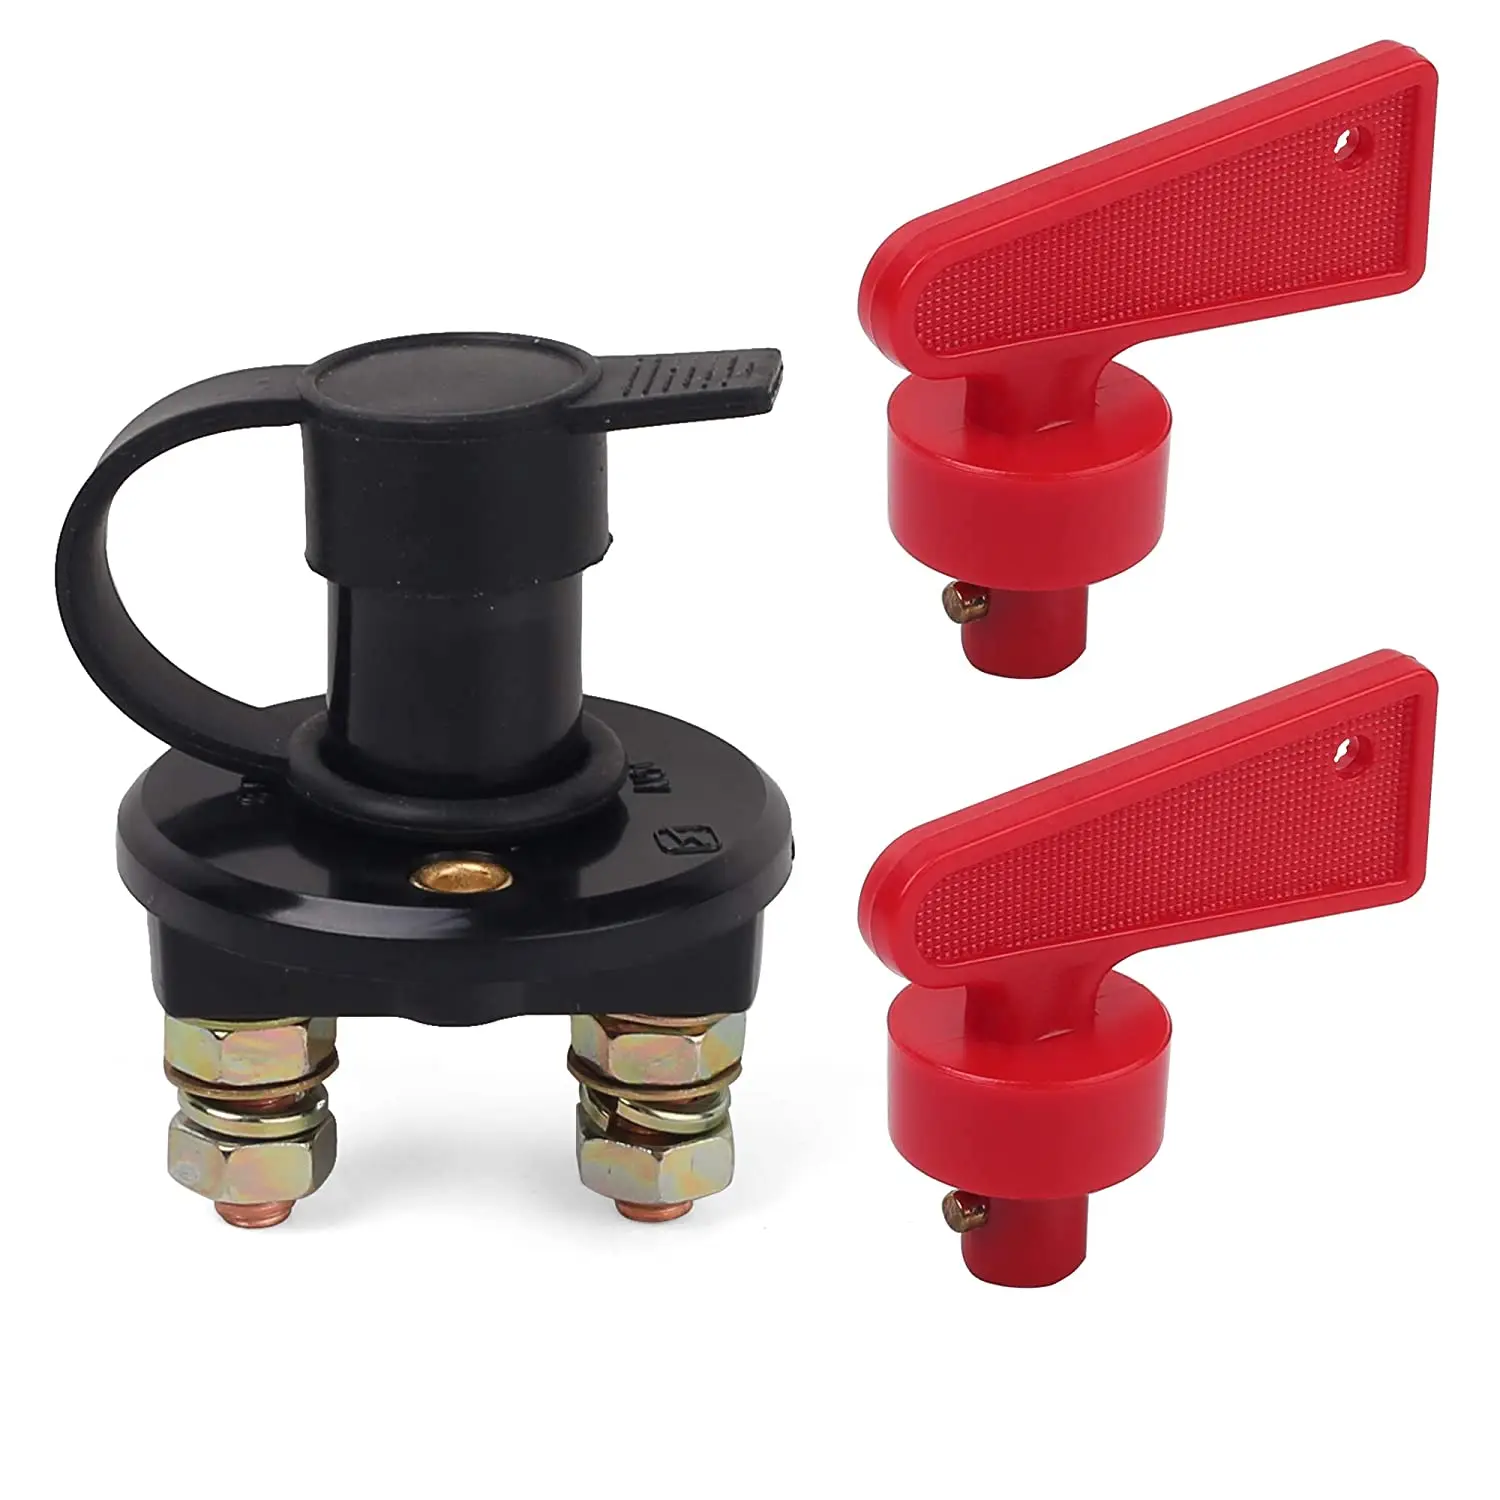 Battery Disconnect Switch Isolator Master Switches for Marine Boat Car Vehicles 12V/24V Battery Switch Master Isolator Cut On/Off Disconnect Switch for RV Battery Marine Boat Car Vehicle Waterproof 